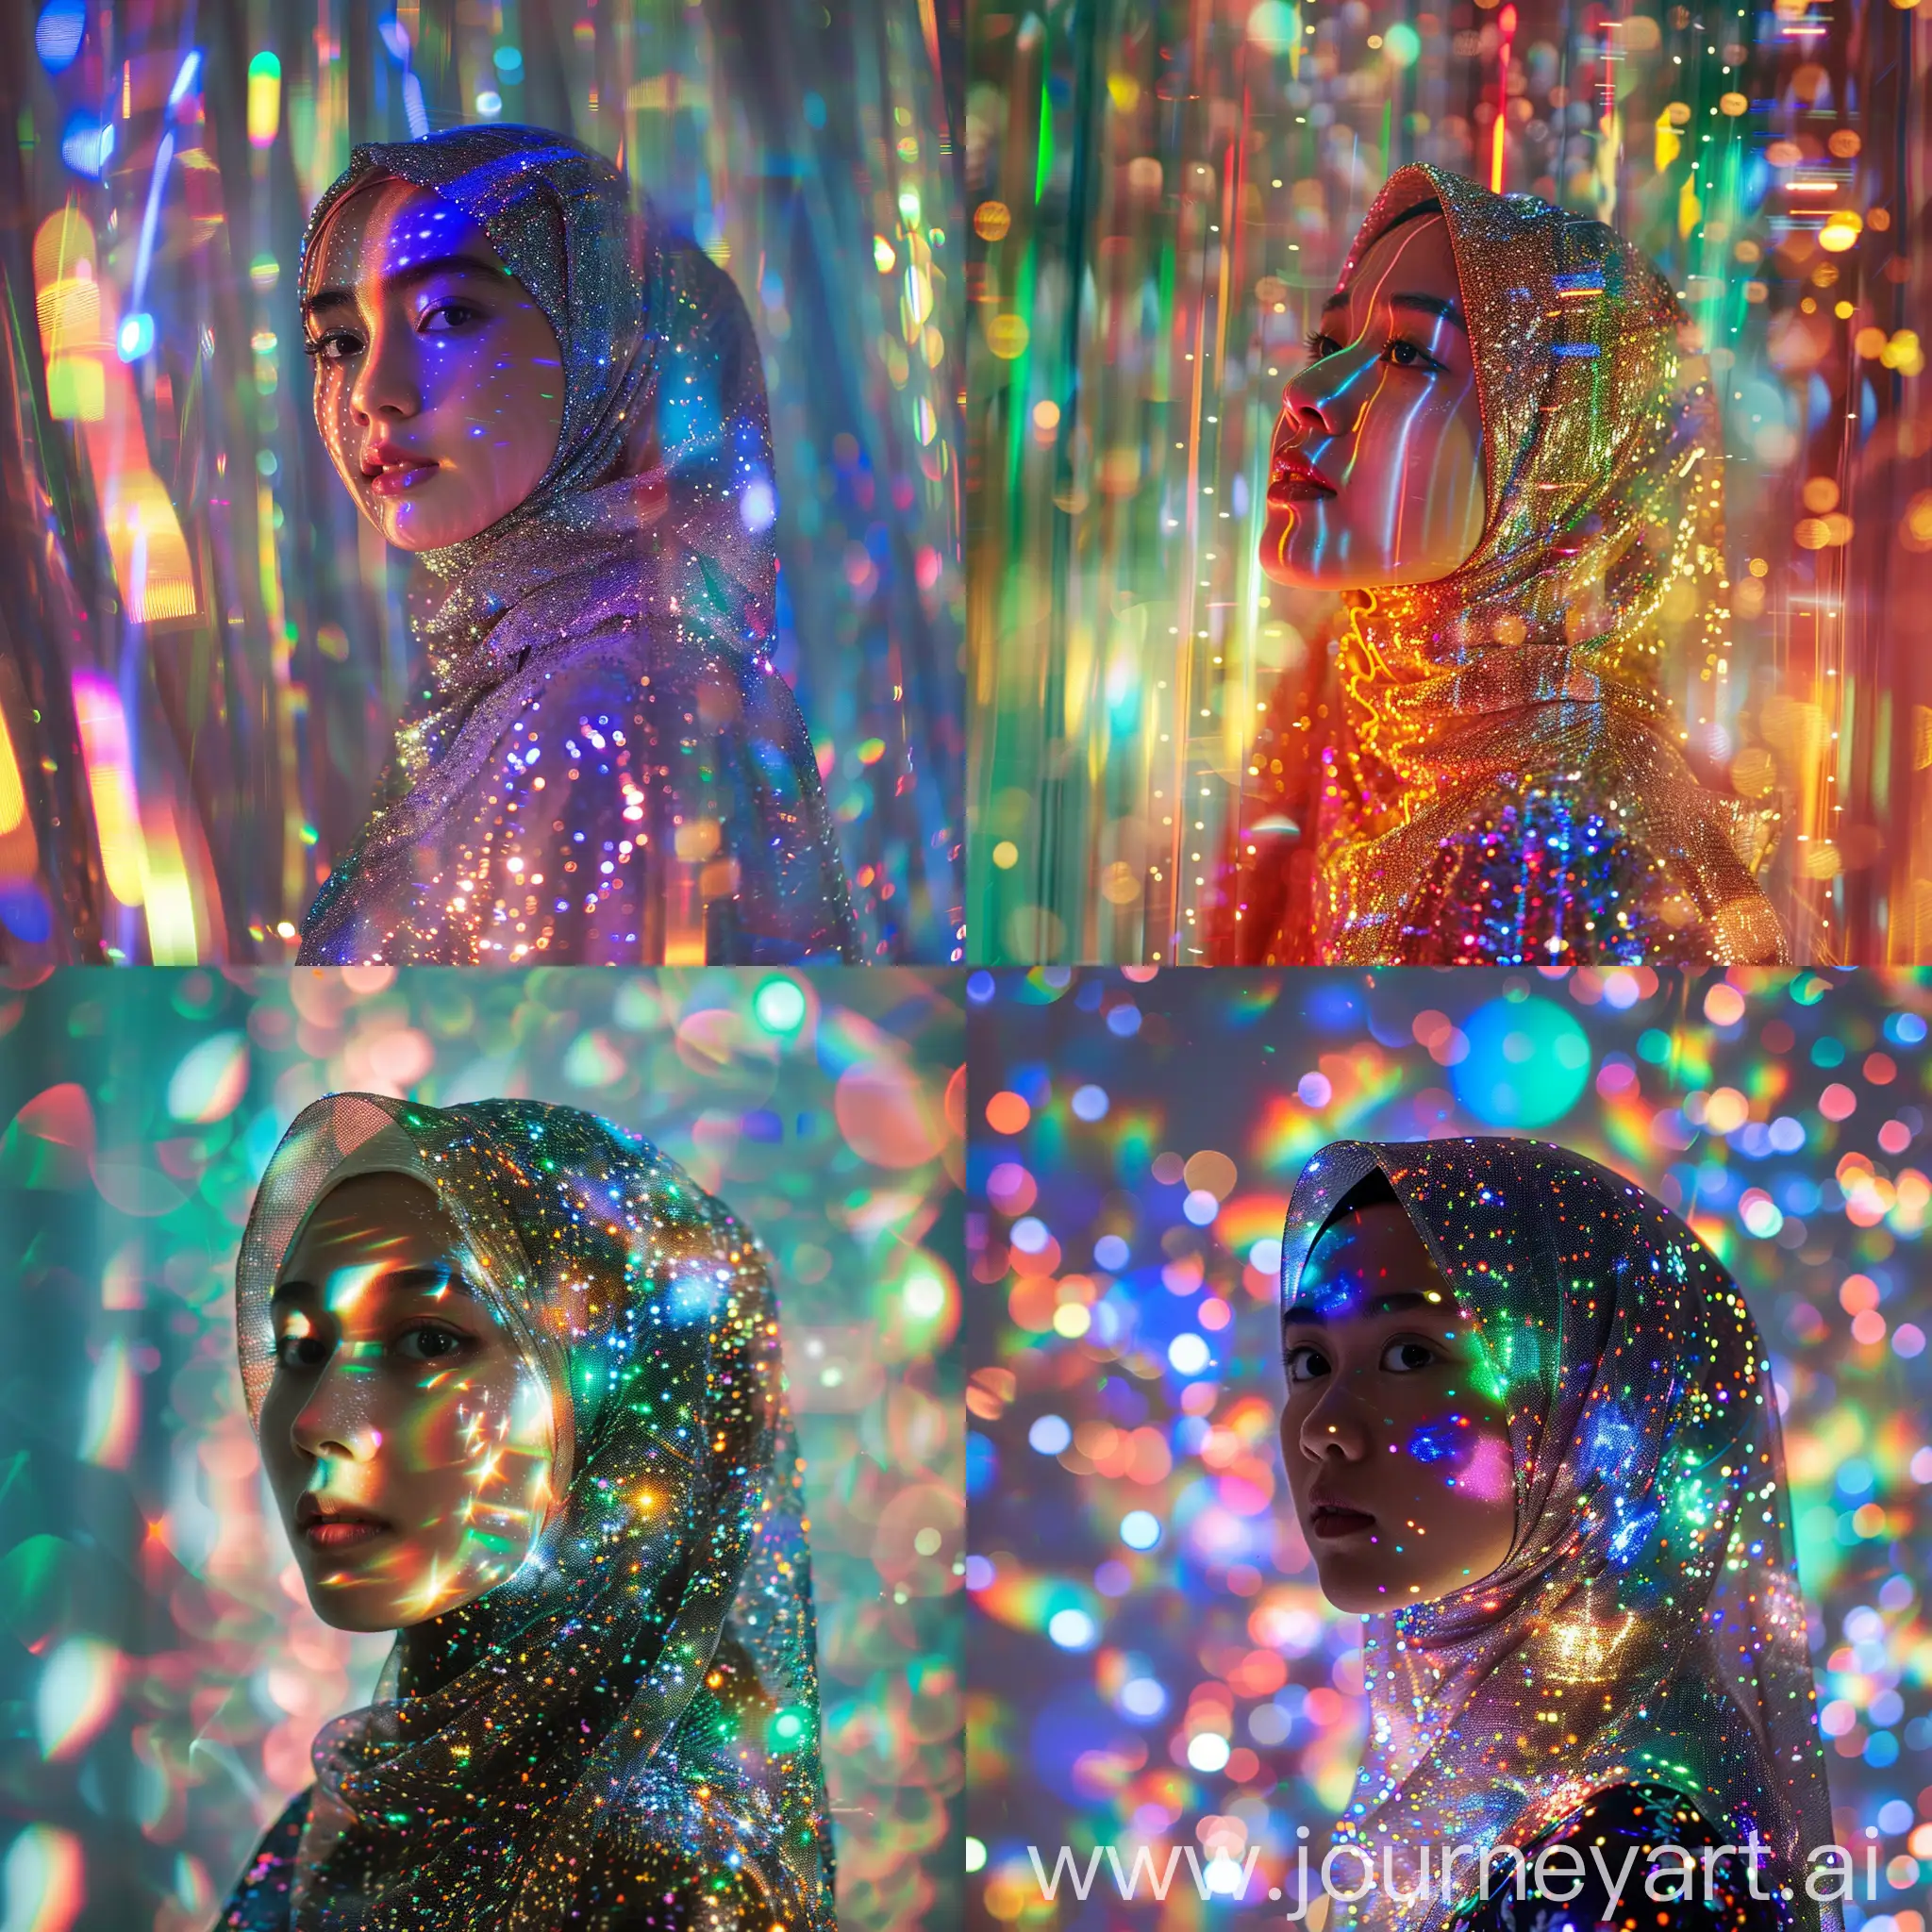 Hijab-Woman-in-Psychedelic-Rainbowcore-Setting-with-Sparkling-Lights